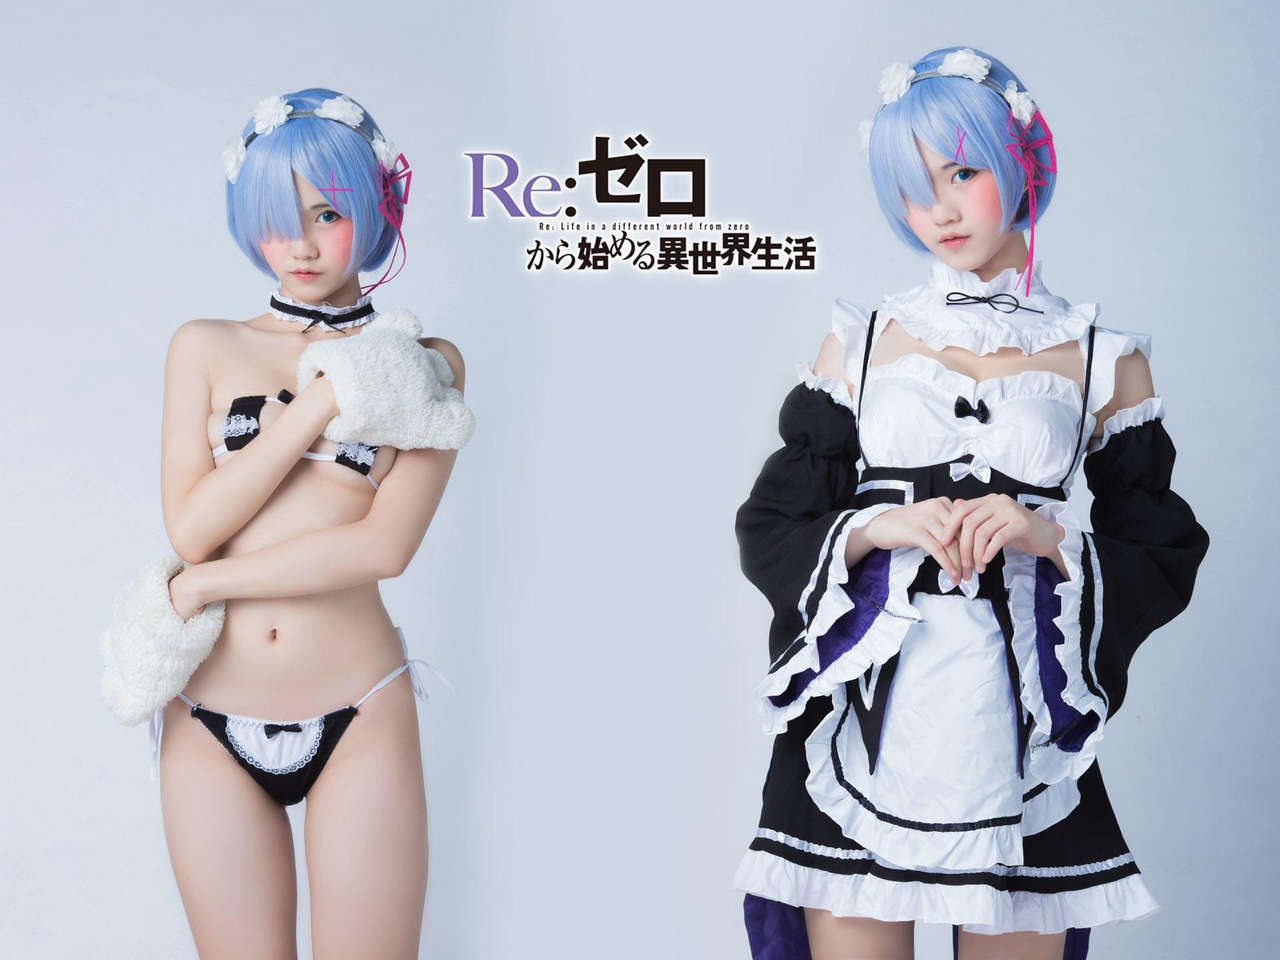 Rem By Moii Cha